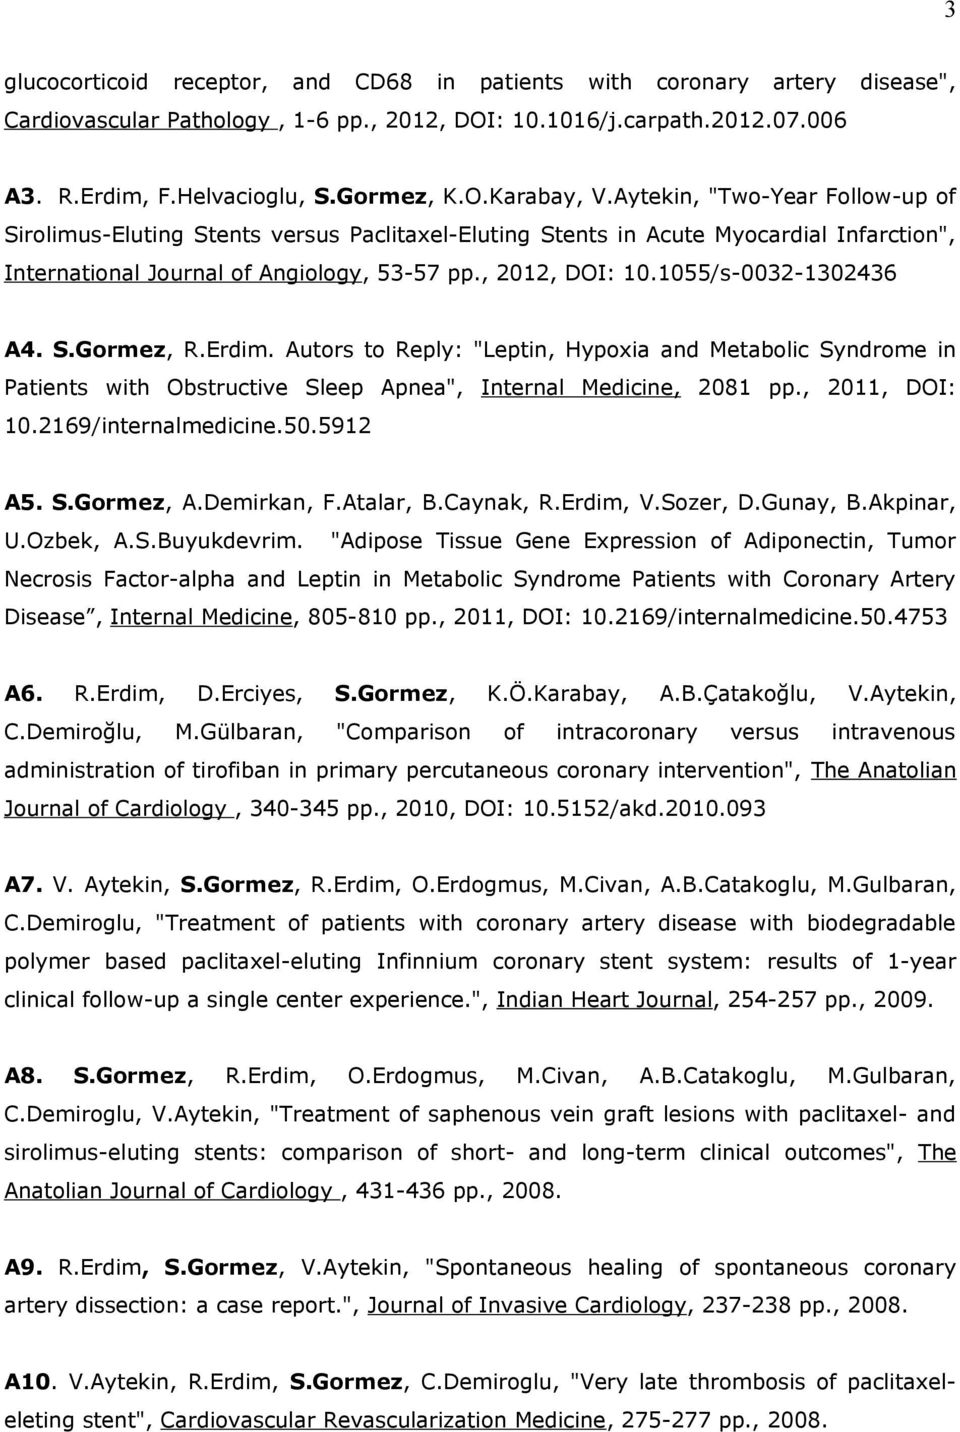 1055/s-0032-1302436 A4. S.Gormez, R.Erdim. Autors to Reply: "Leptin, Hypoxia and Metabolic Syndrome in Patients with Obstructive Sleep Apnea", Internal Medicine, 2081 pp., 2011, DOI: 10.